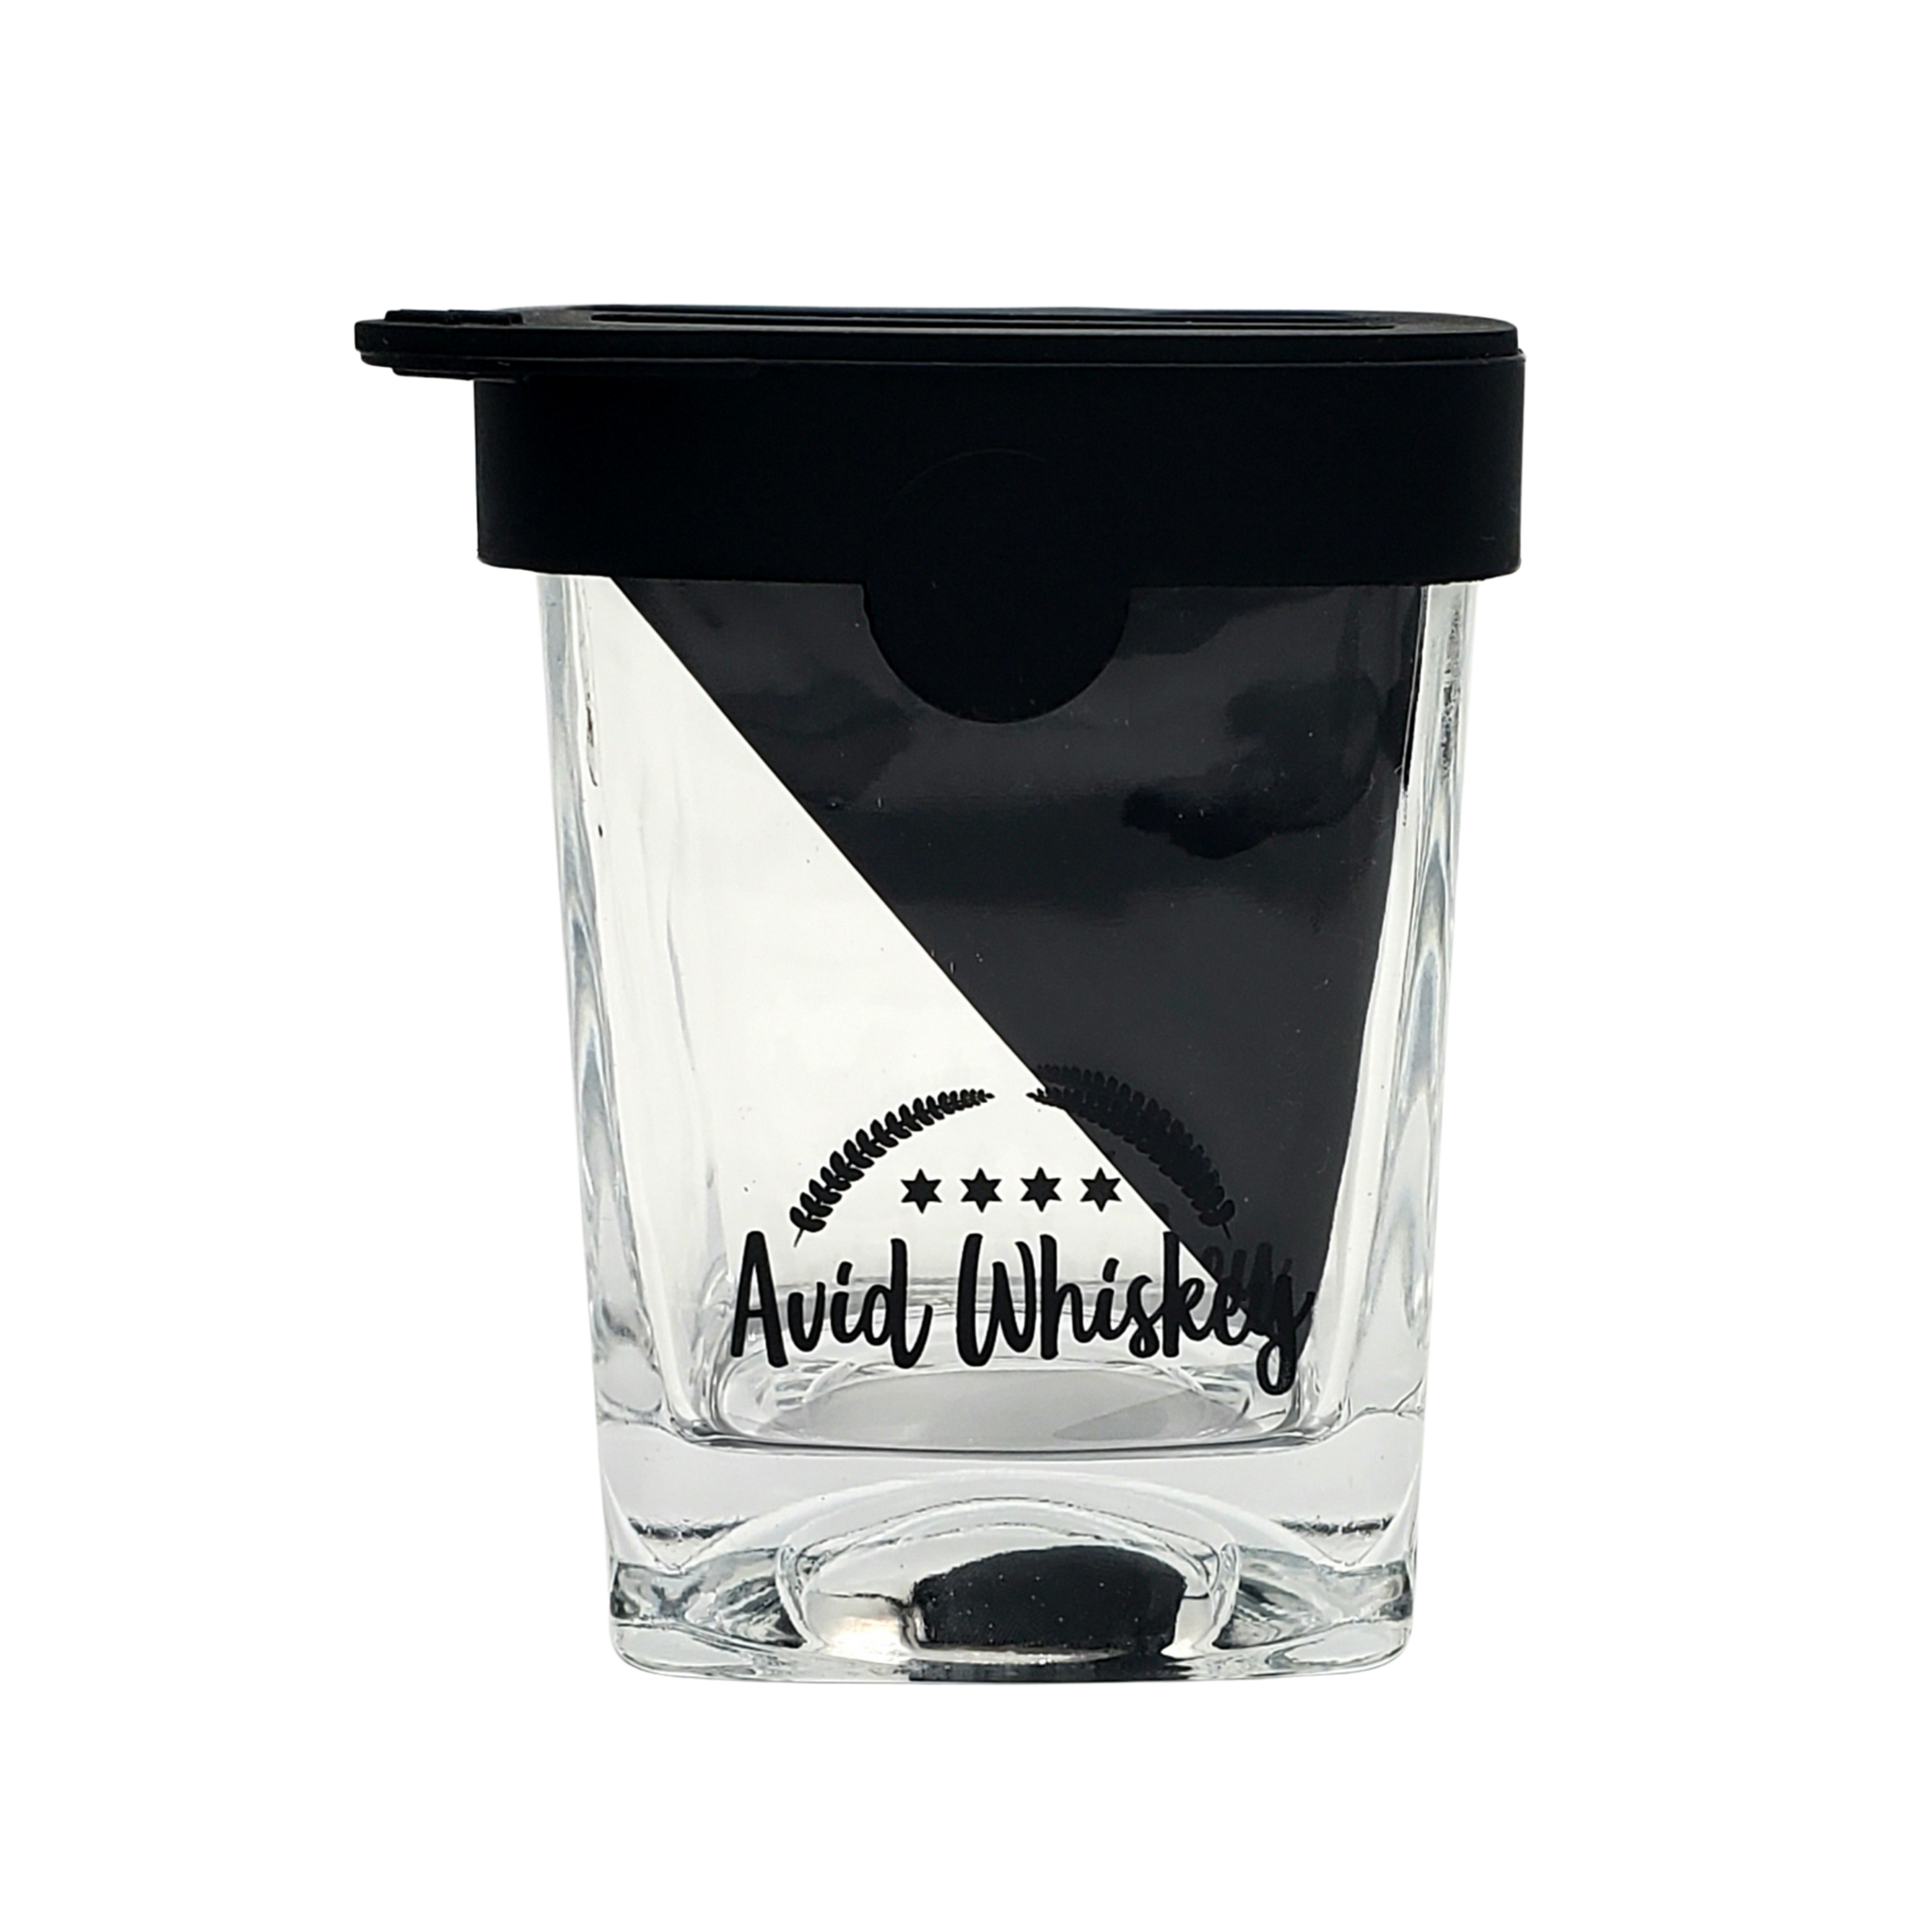 Whiskey Ice Wedge Mold and Glass – Forever Anniversary